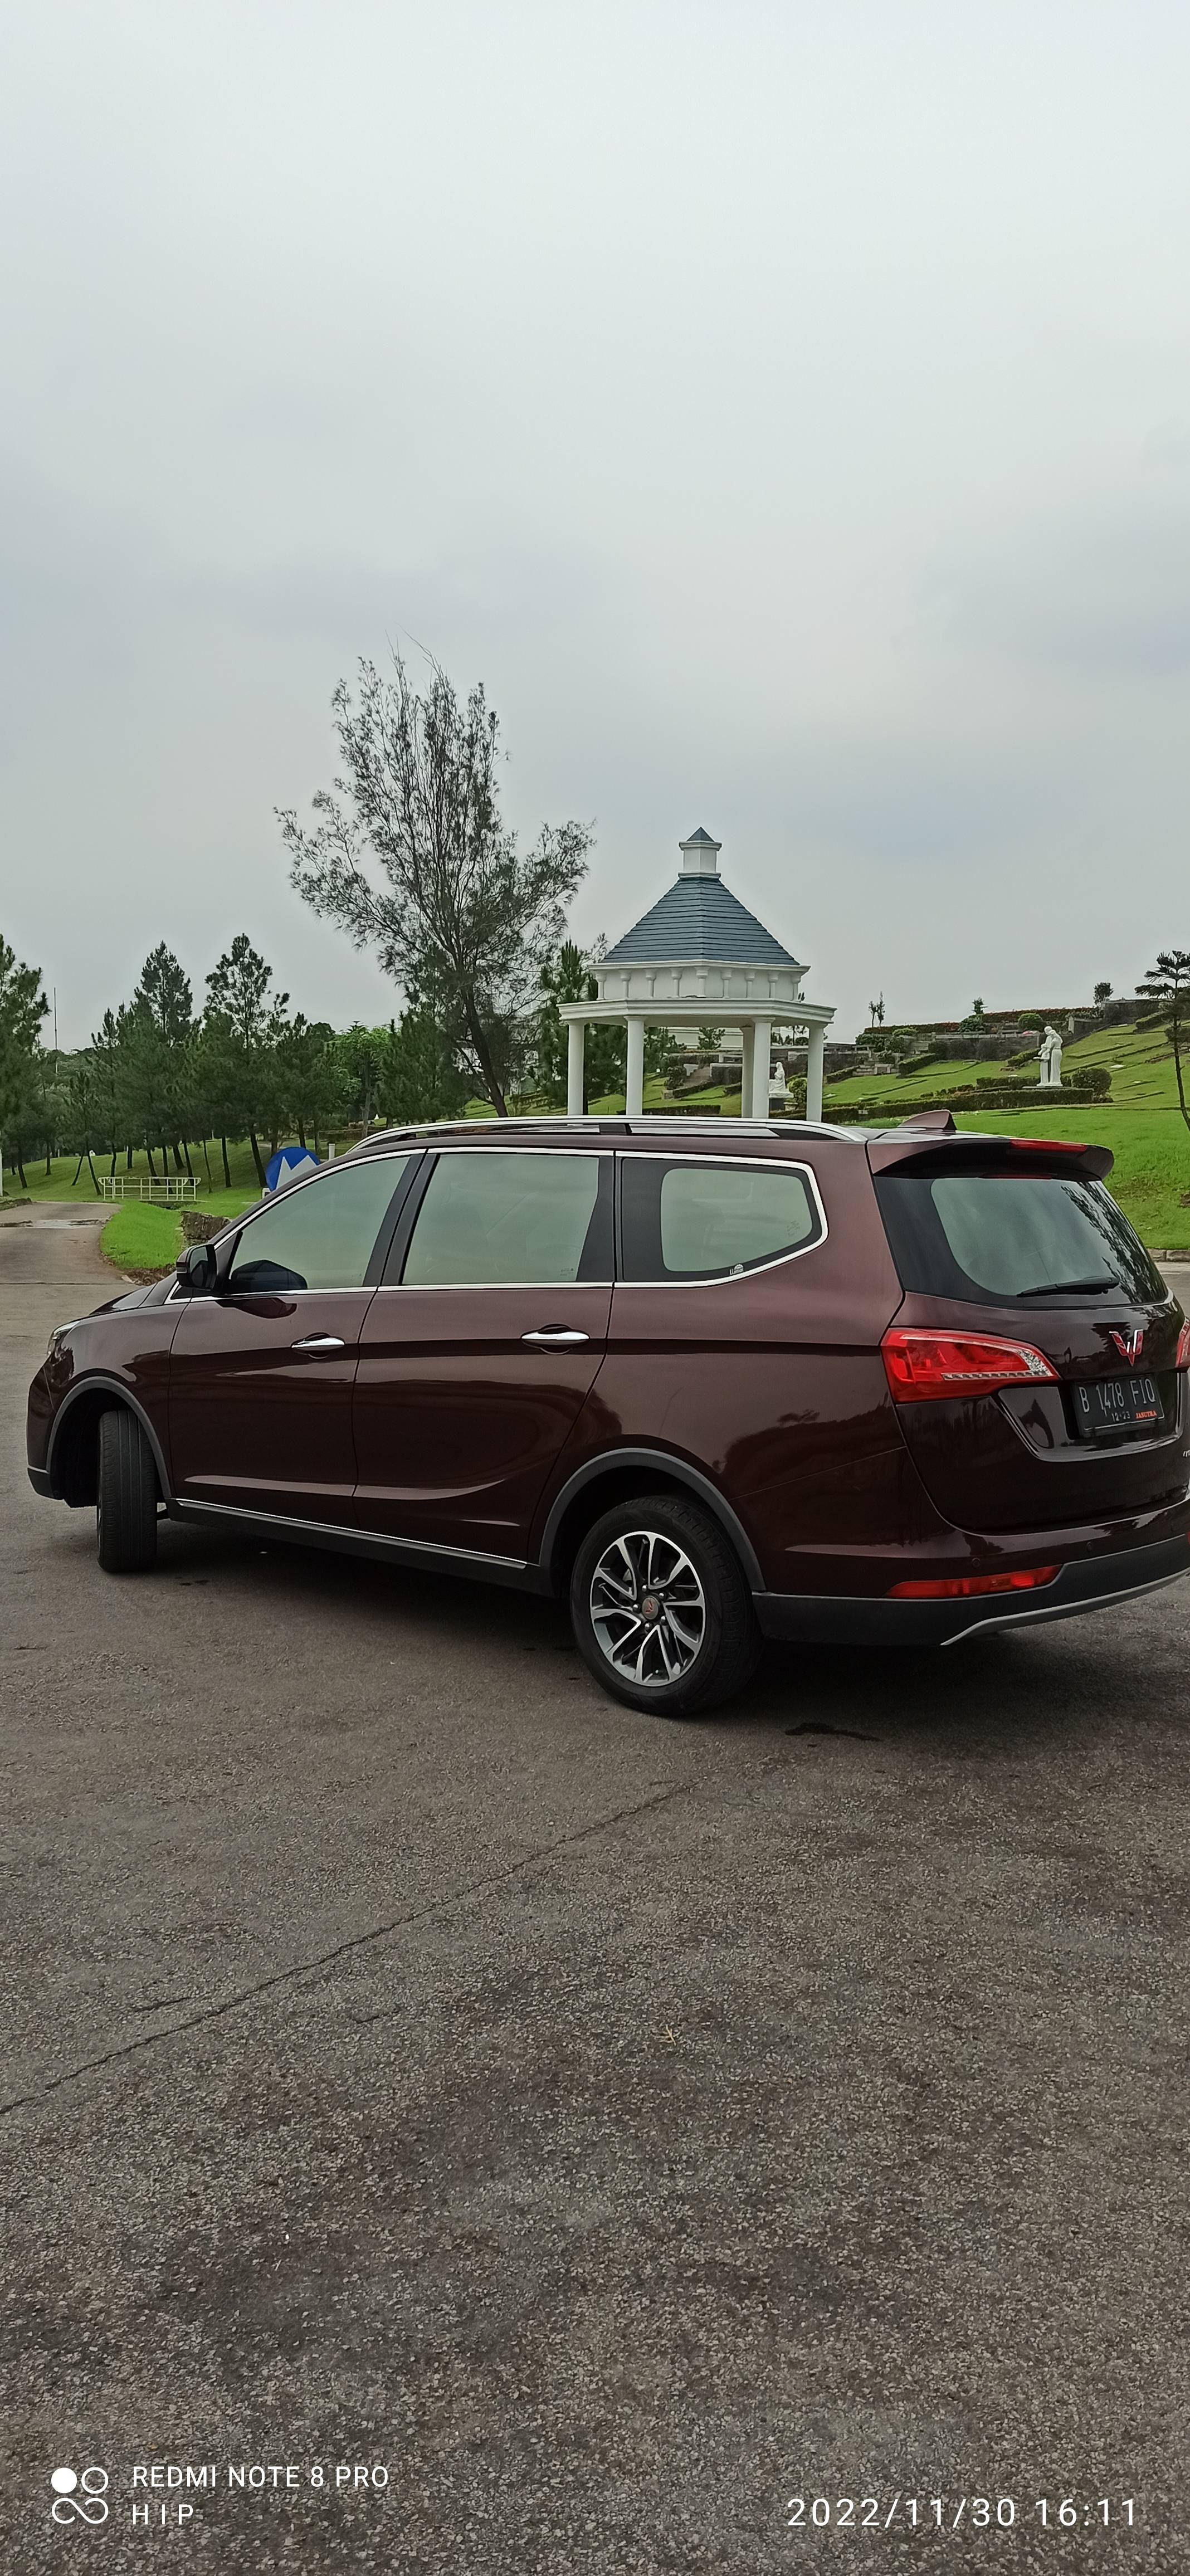 Used 2018 Wuling Cortez 1.8 L LUX+AMT 1.8 L LUX+AMT for sale